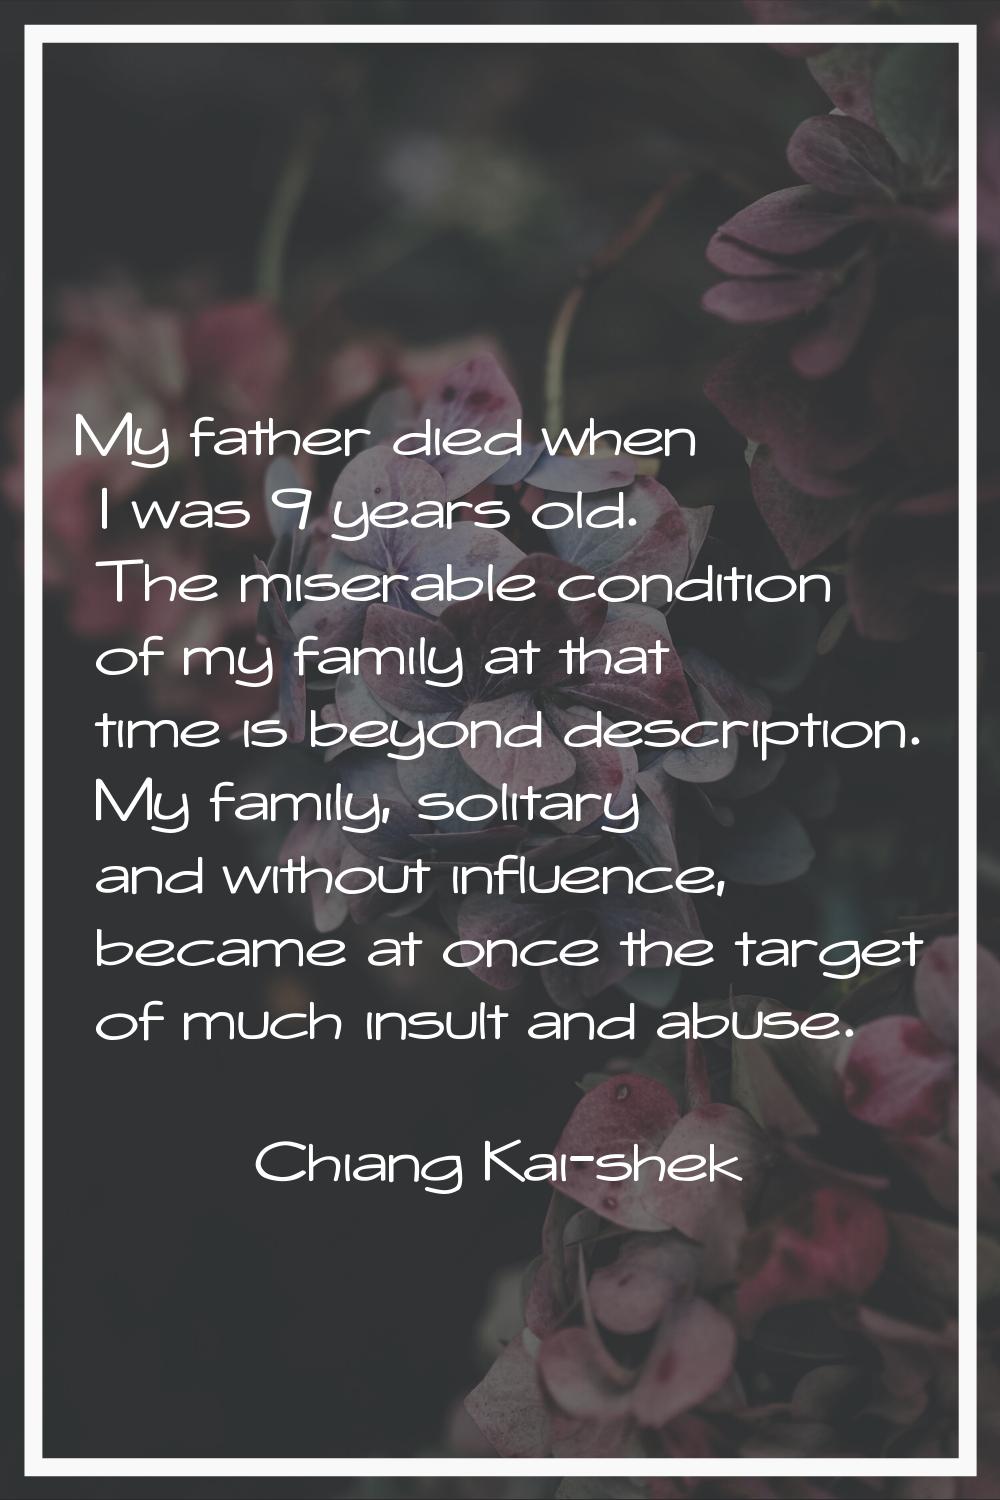 My father died when I was 9 years old. The miserable condition of my family at that time is beyond 